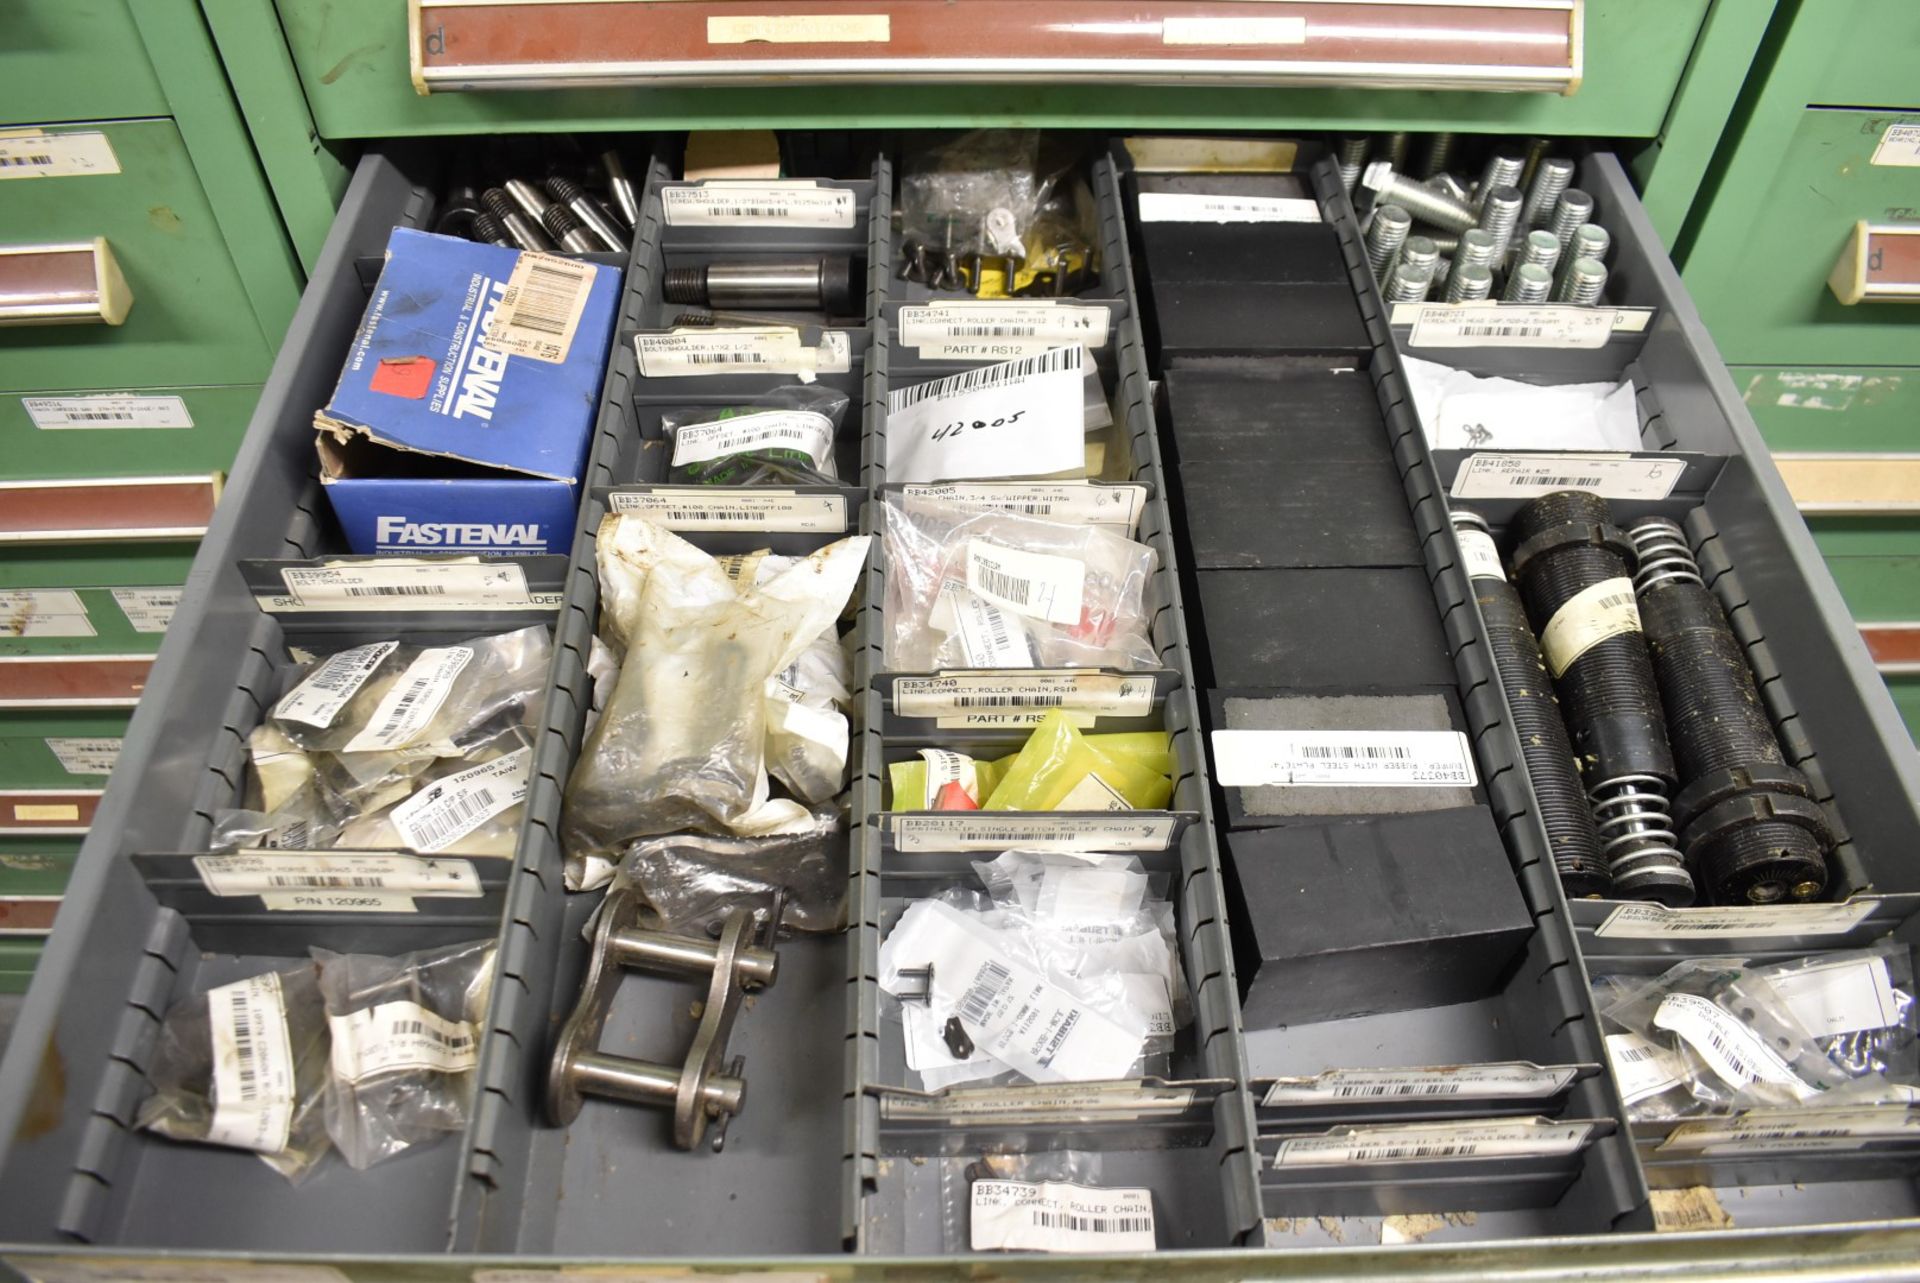 LOT/ CONTENTS OF CABINET - INCLUDING COUPLINGS, INSERTS, SLEEVES, LINKS, SEALS (TOOL CABINET NOT - Image 6 of 8